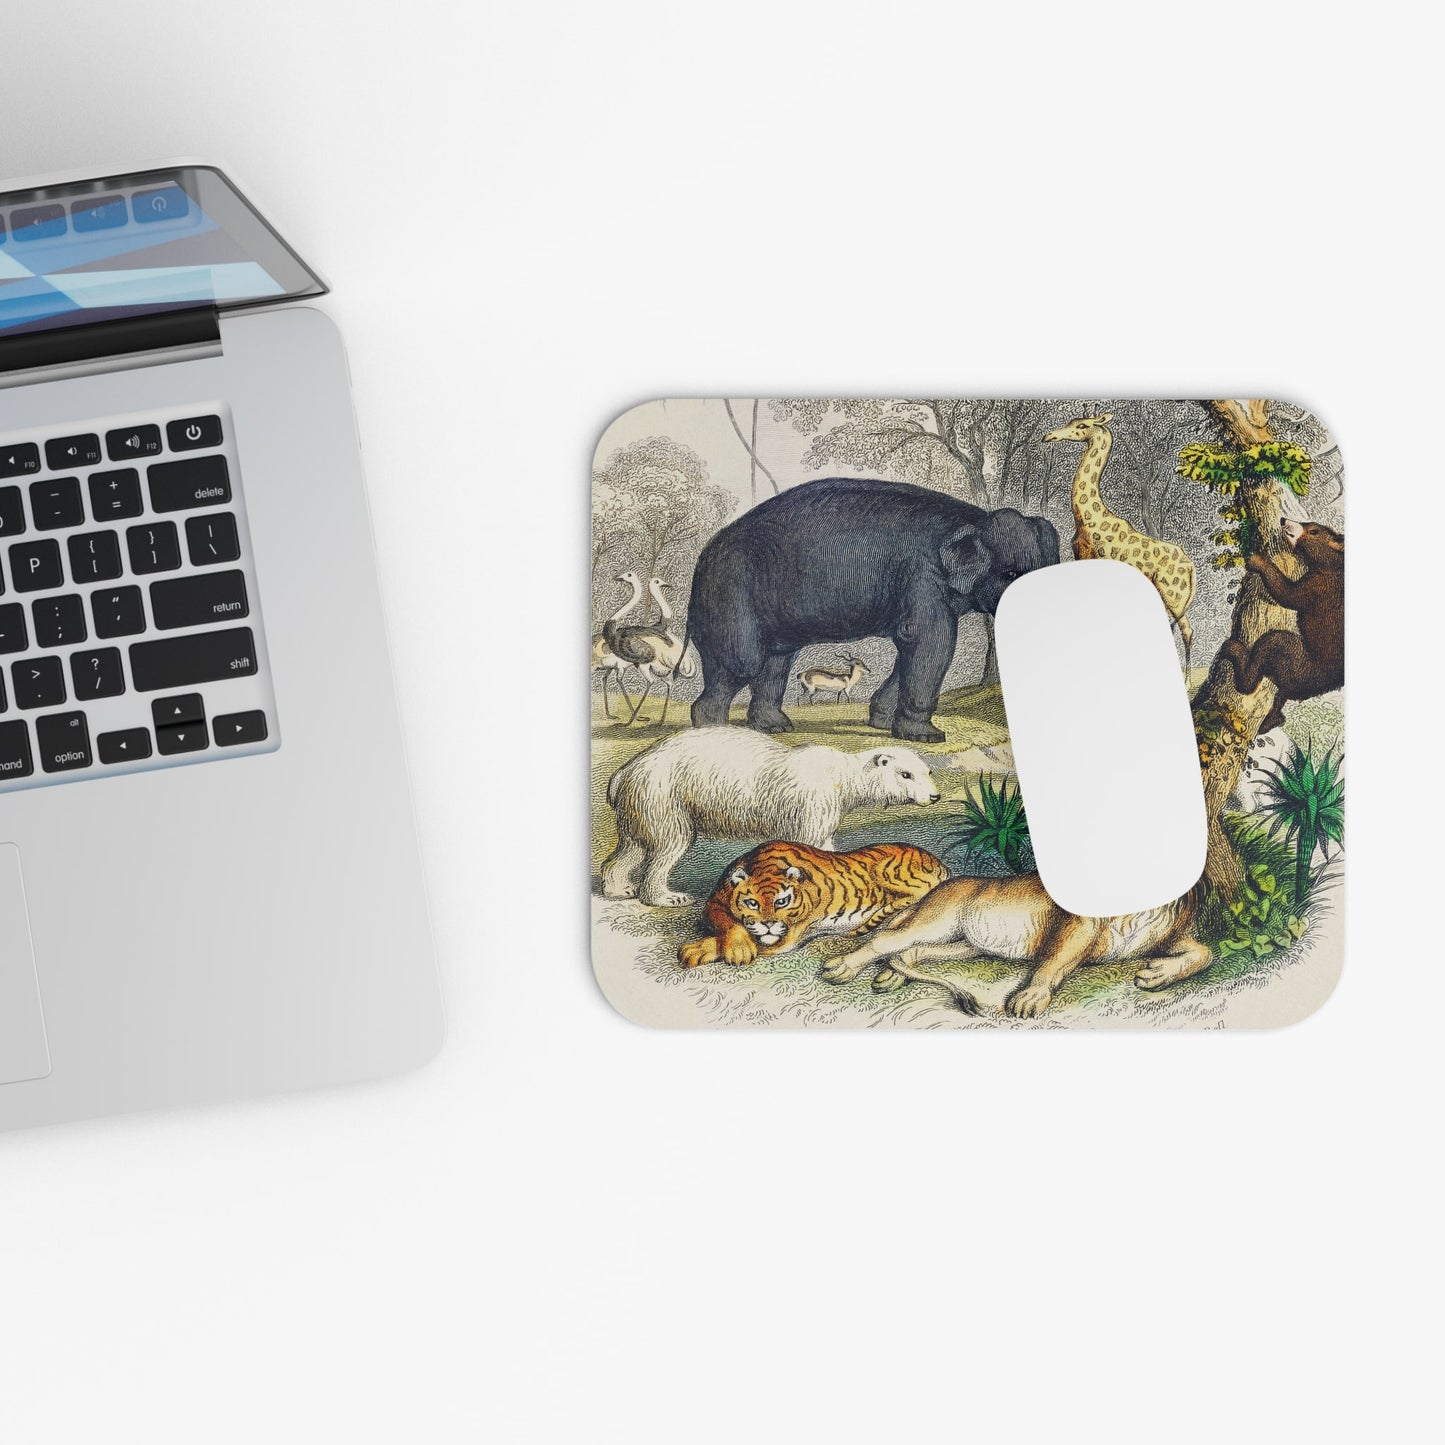 Vintage Animal Book Cover Design Laptop Mouse Pad with White Mouse